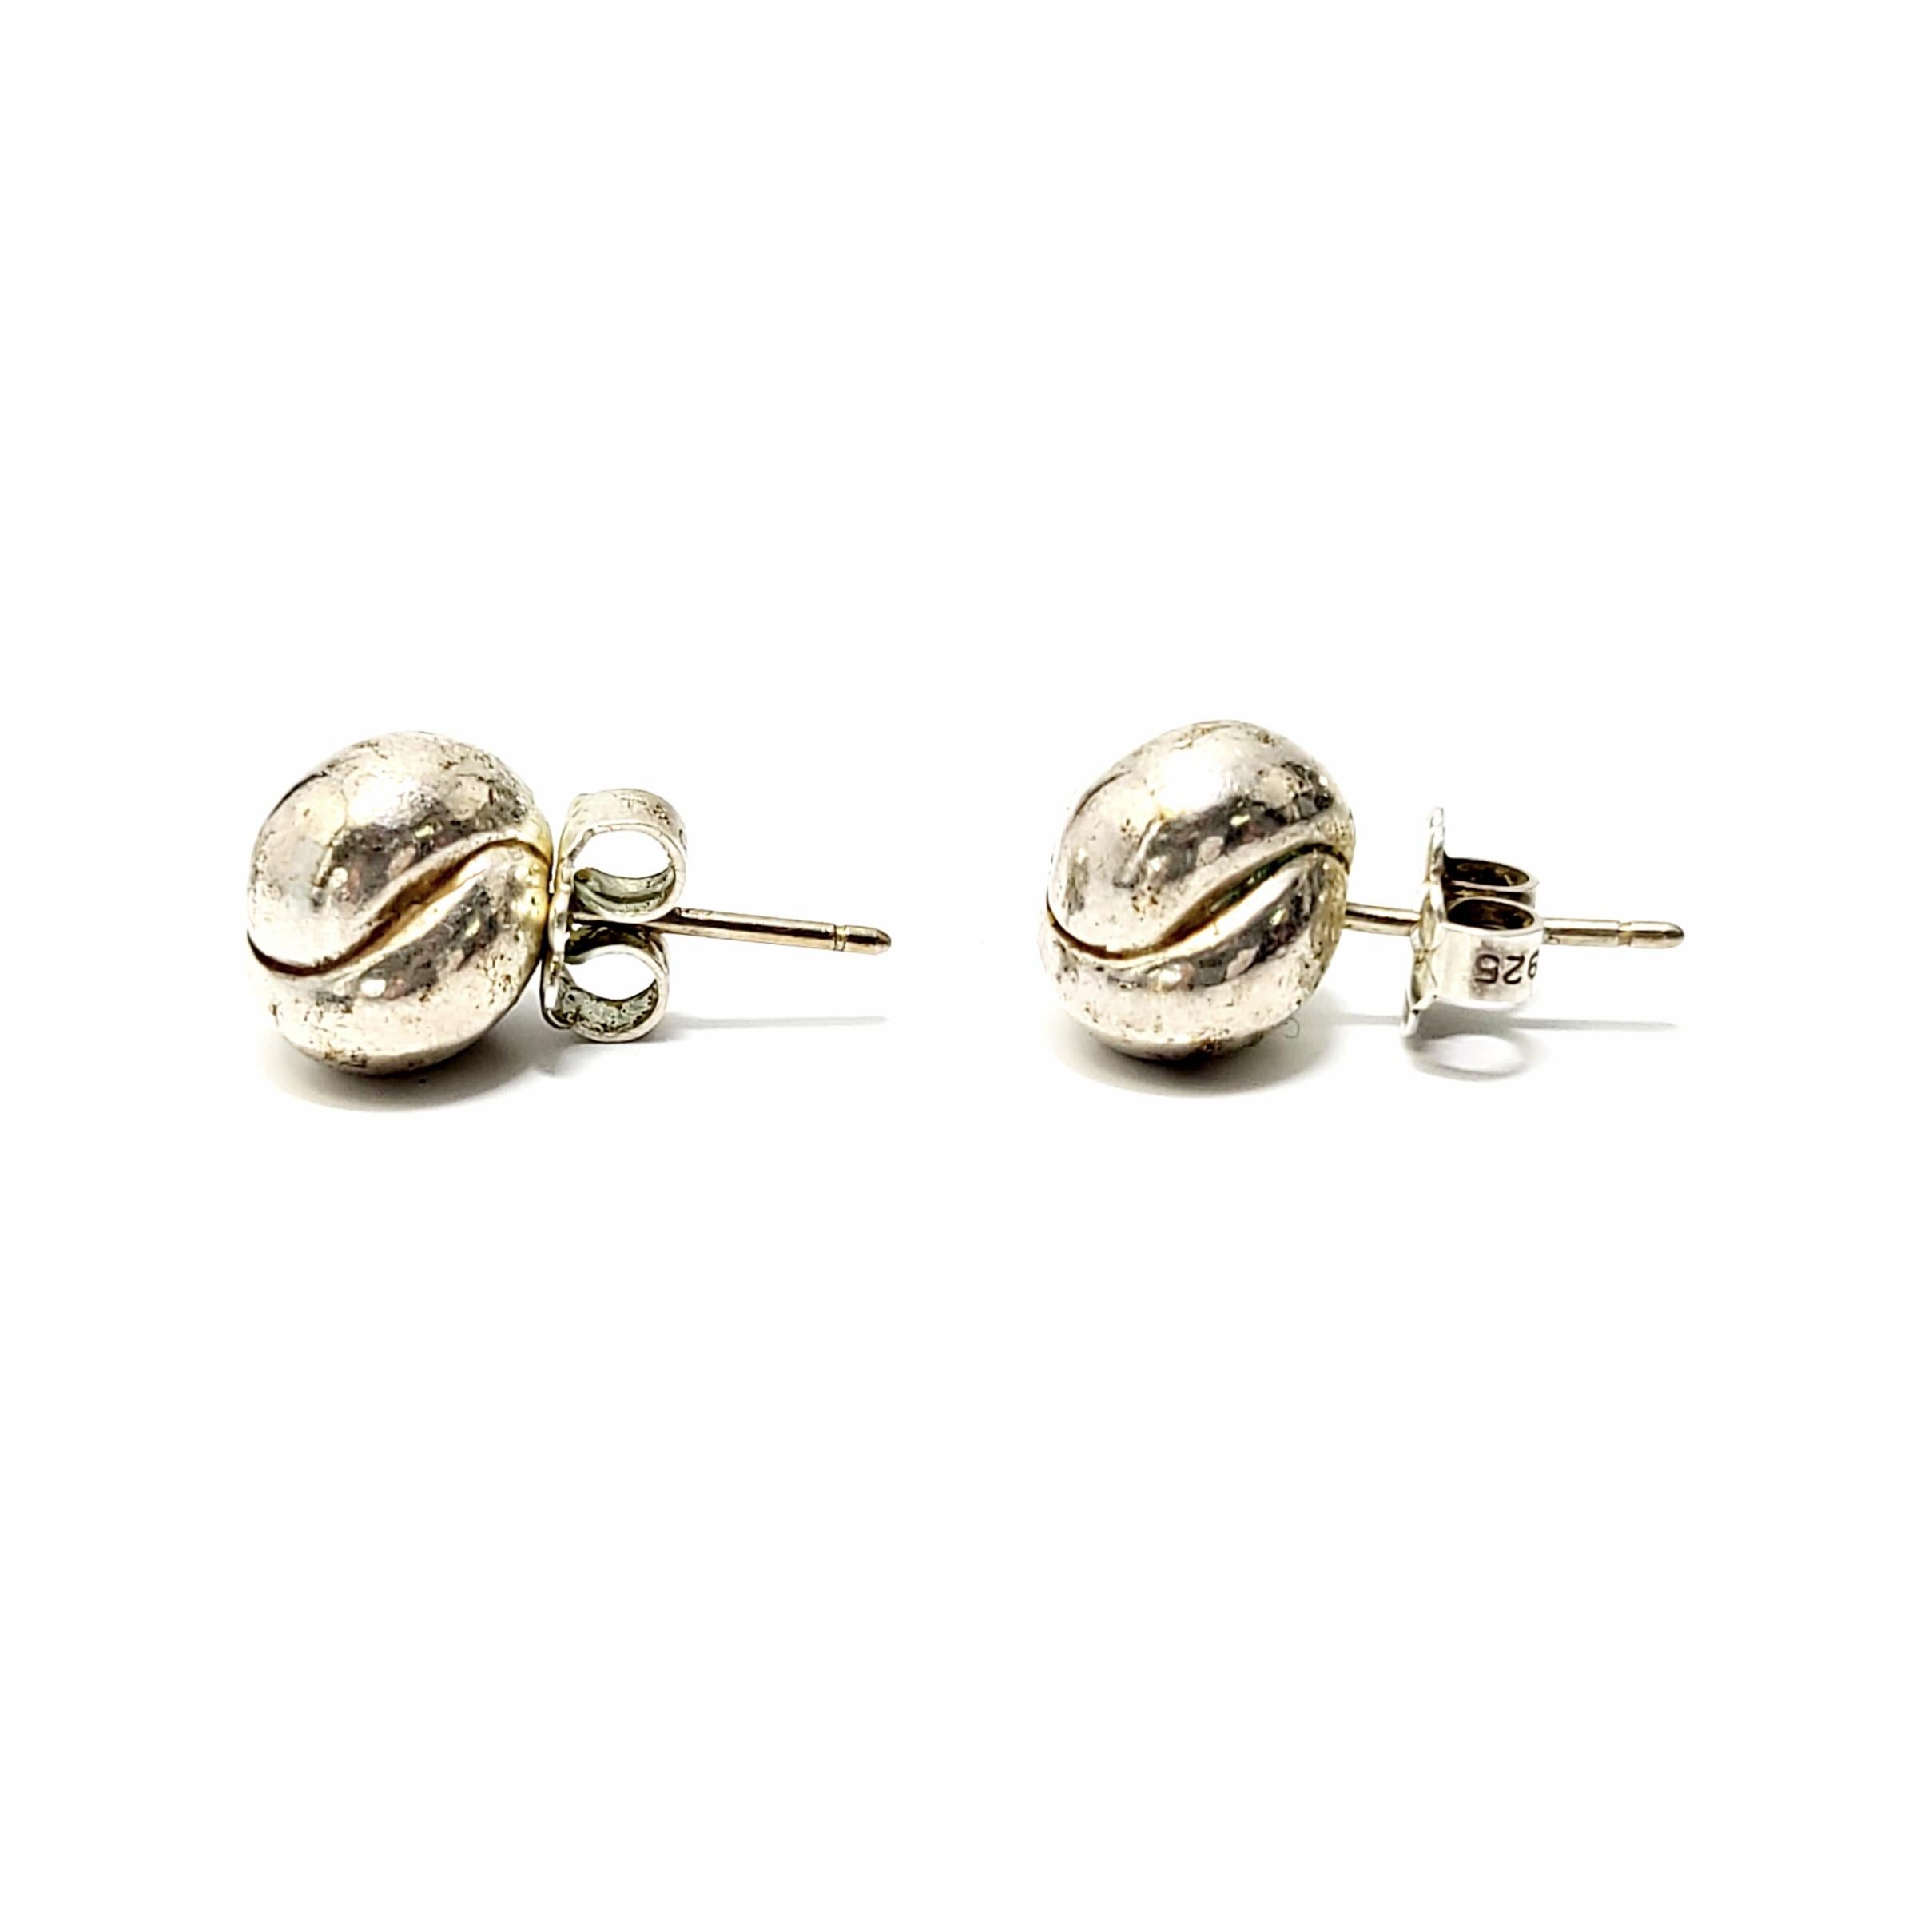 Tiffany & Co sterling silver twist love knot ball stud earrings.

Authentic Tiffany earrings with a timeless design.

Measures approx 9mm in diameter.

Weighs approx 7g, 4.5dwt

Very nice condition with some slight surface scratches and some